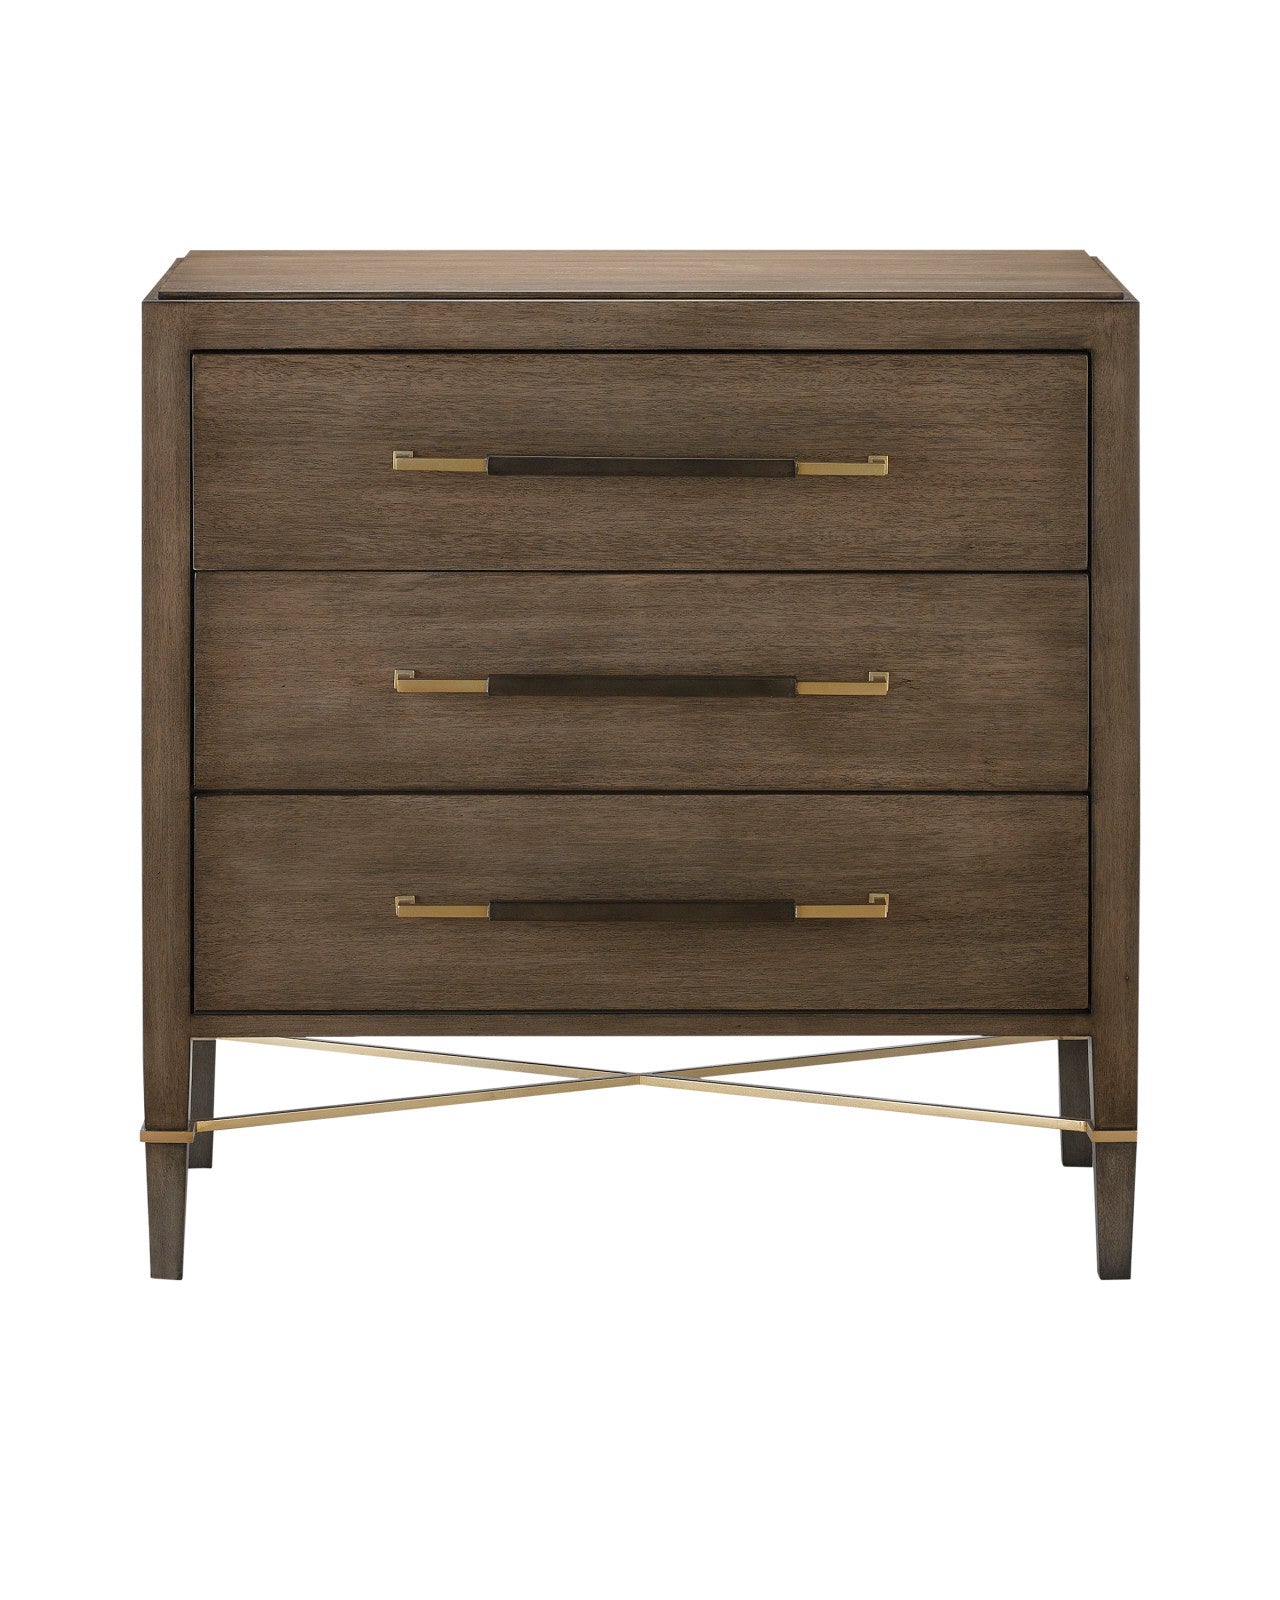 Verona Chanterelle Chest by Currey & Co.